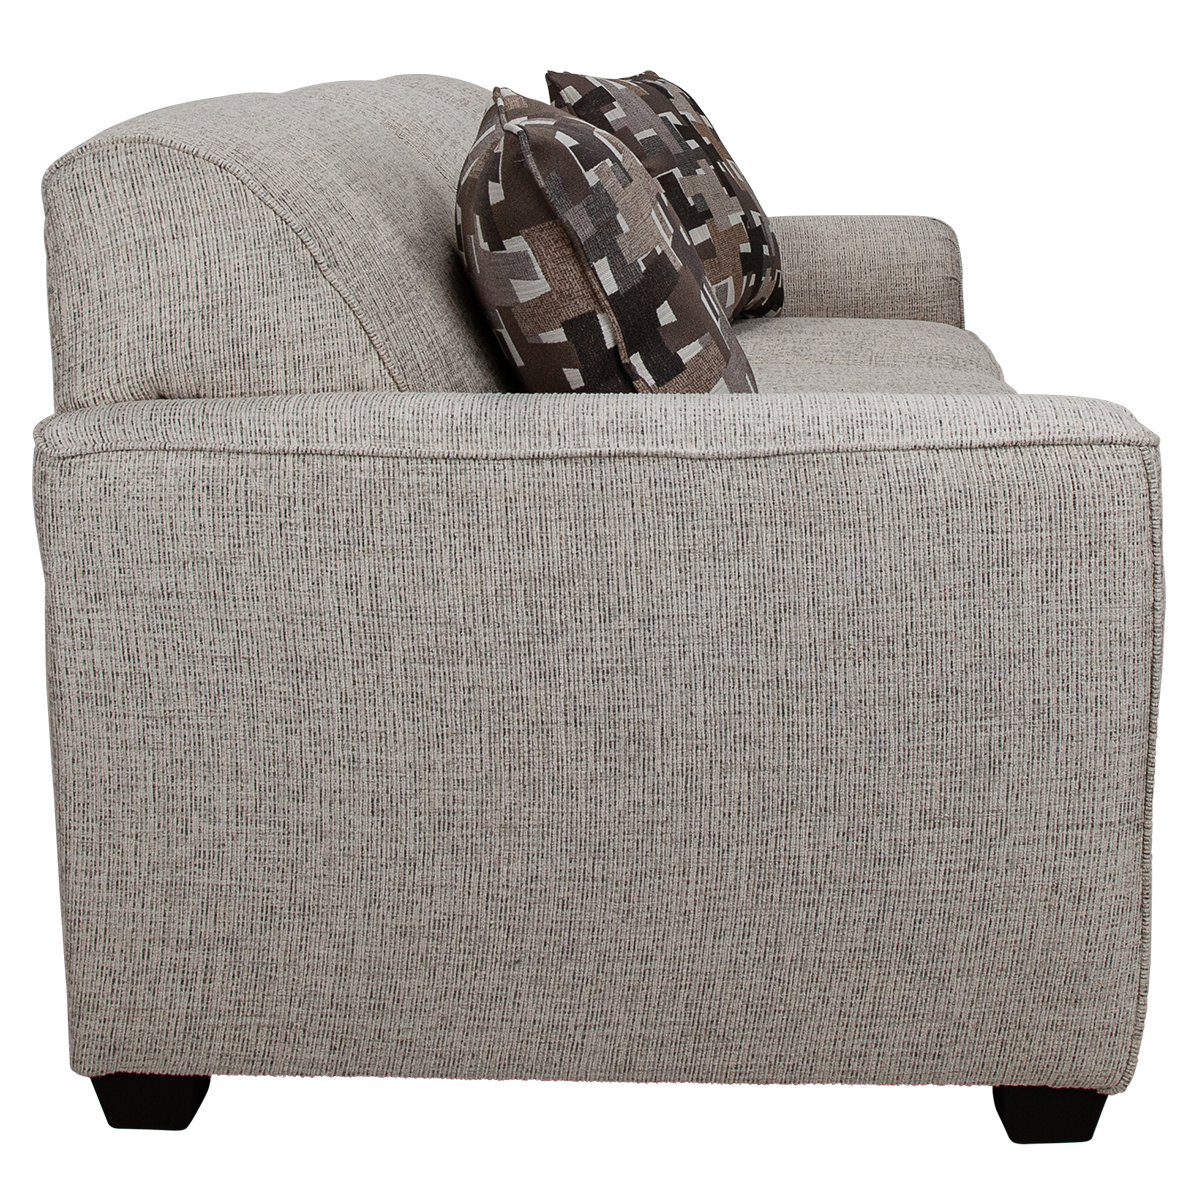 Picture of AT EASE SOFA W/FRAME COIL *